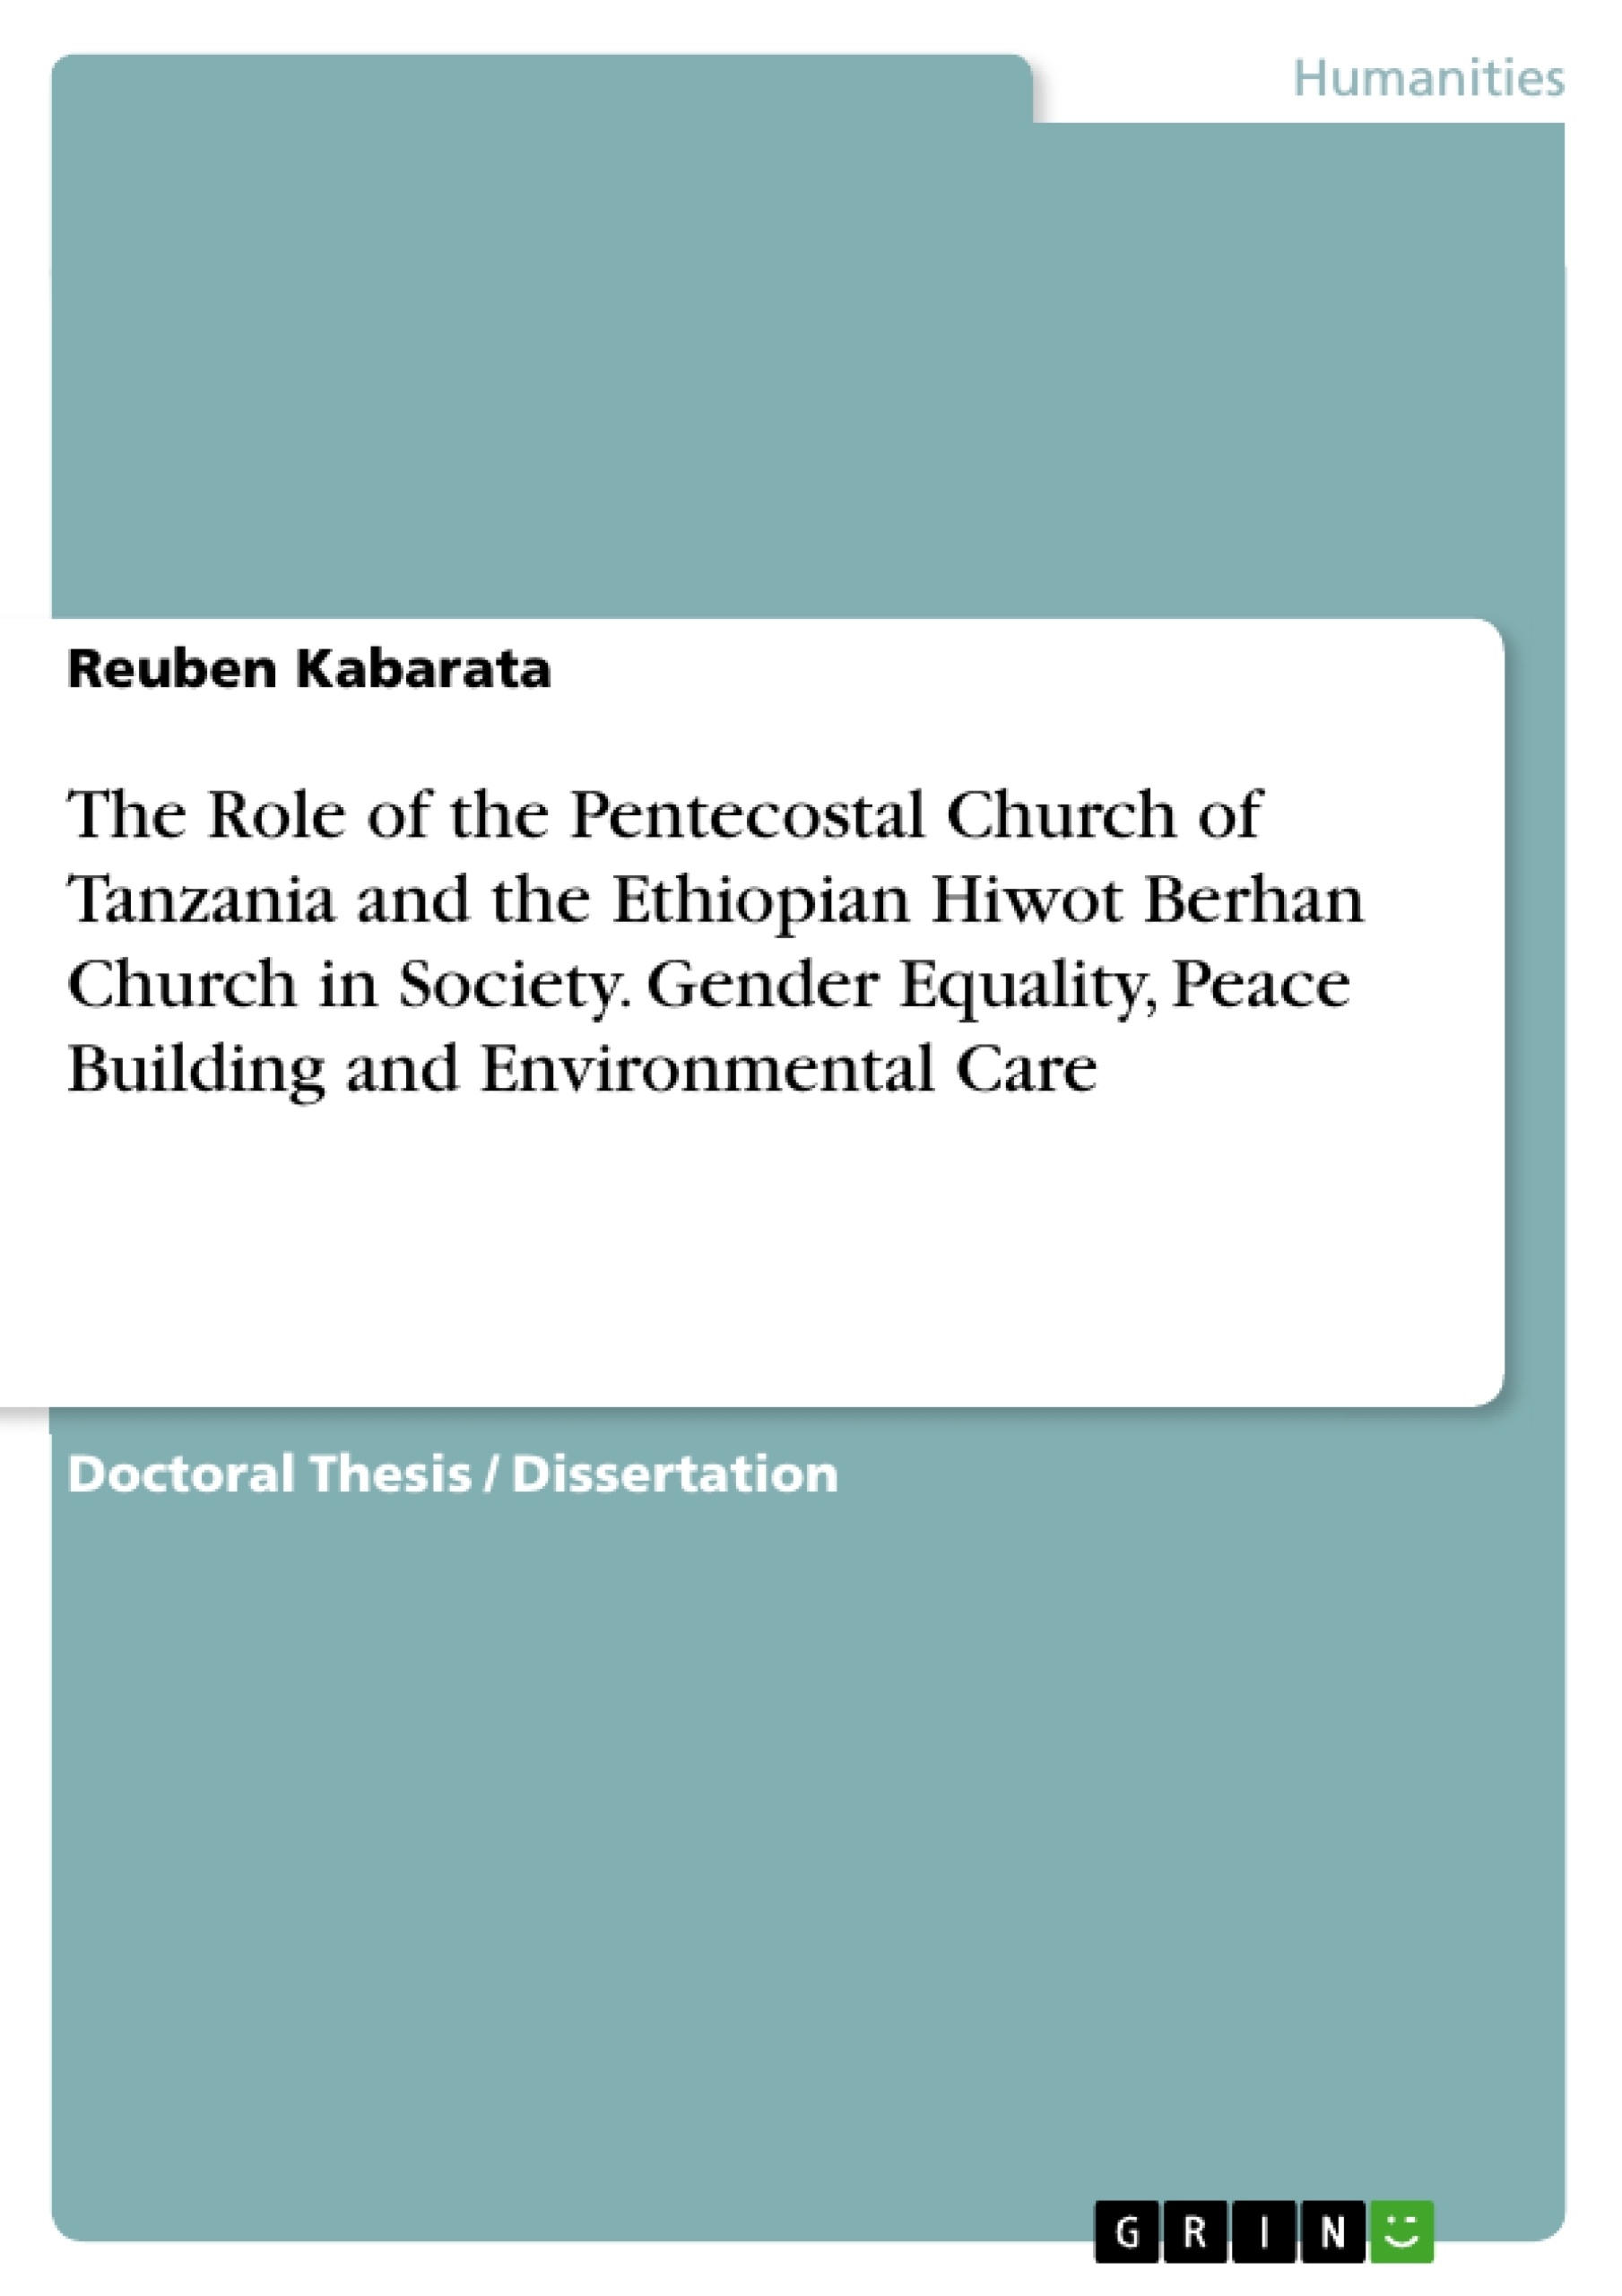 Title: The Role of the Pentecostal Church of Tanzania and the Ethiopian Hiwot Berhan Church in Society. Gender Equality, Peace Building and Environmental Care